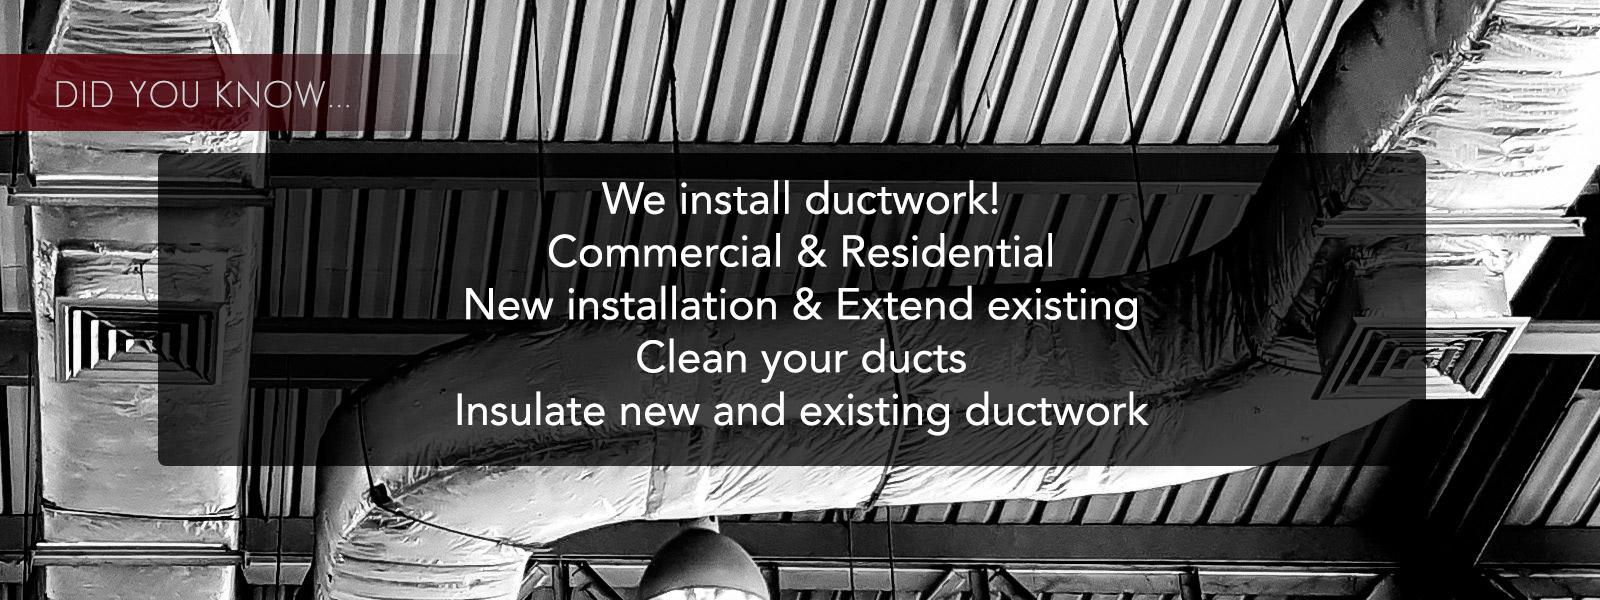 ductwork cleaning and instalation